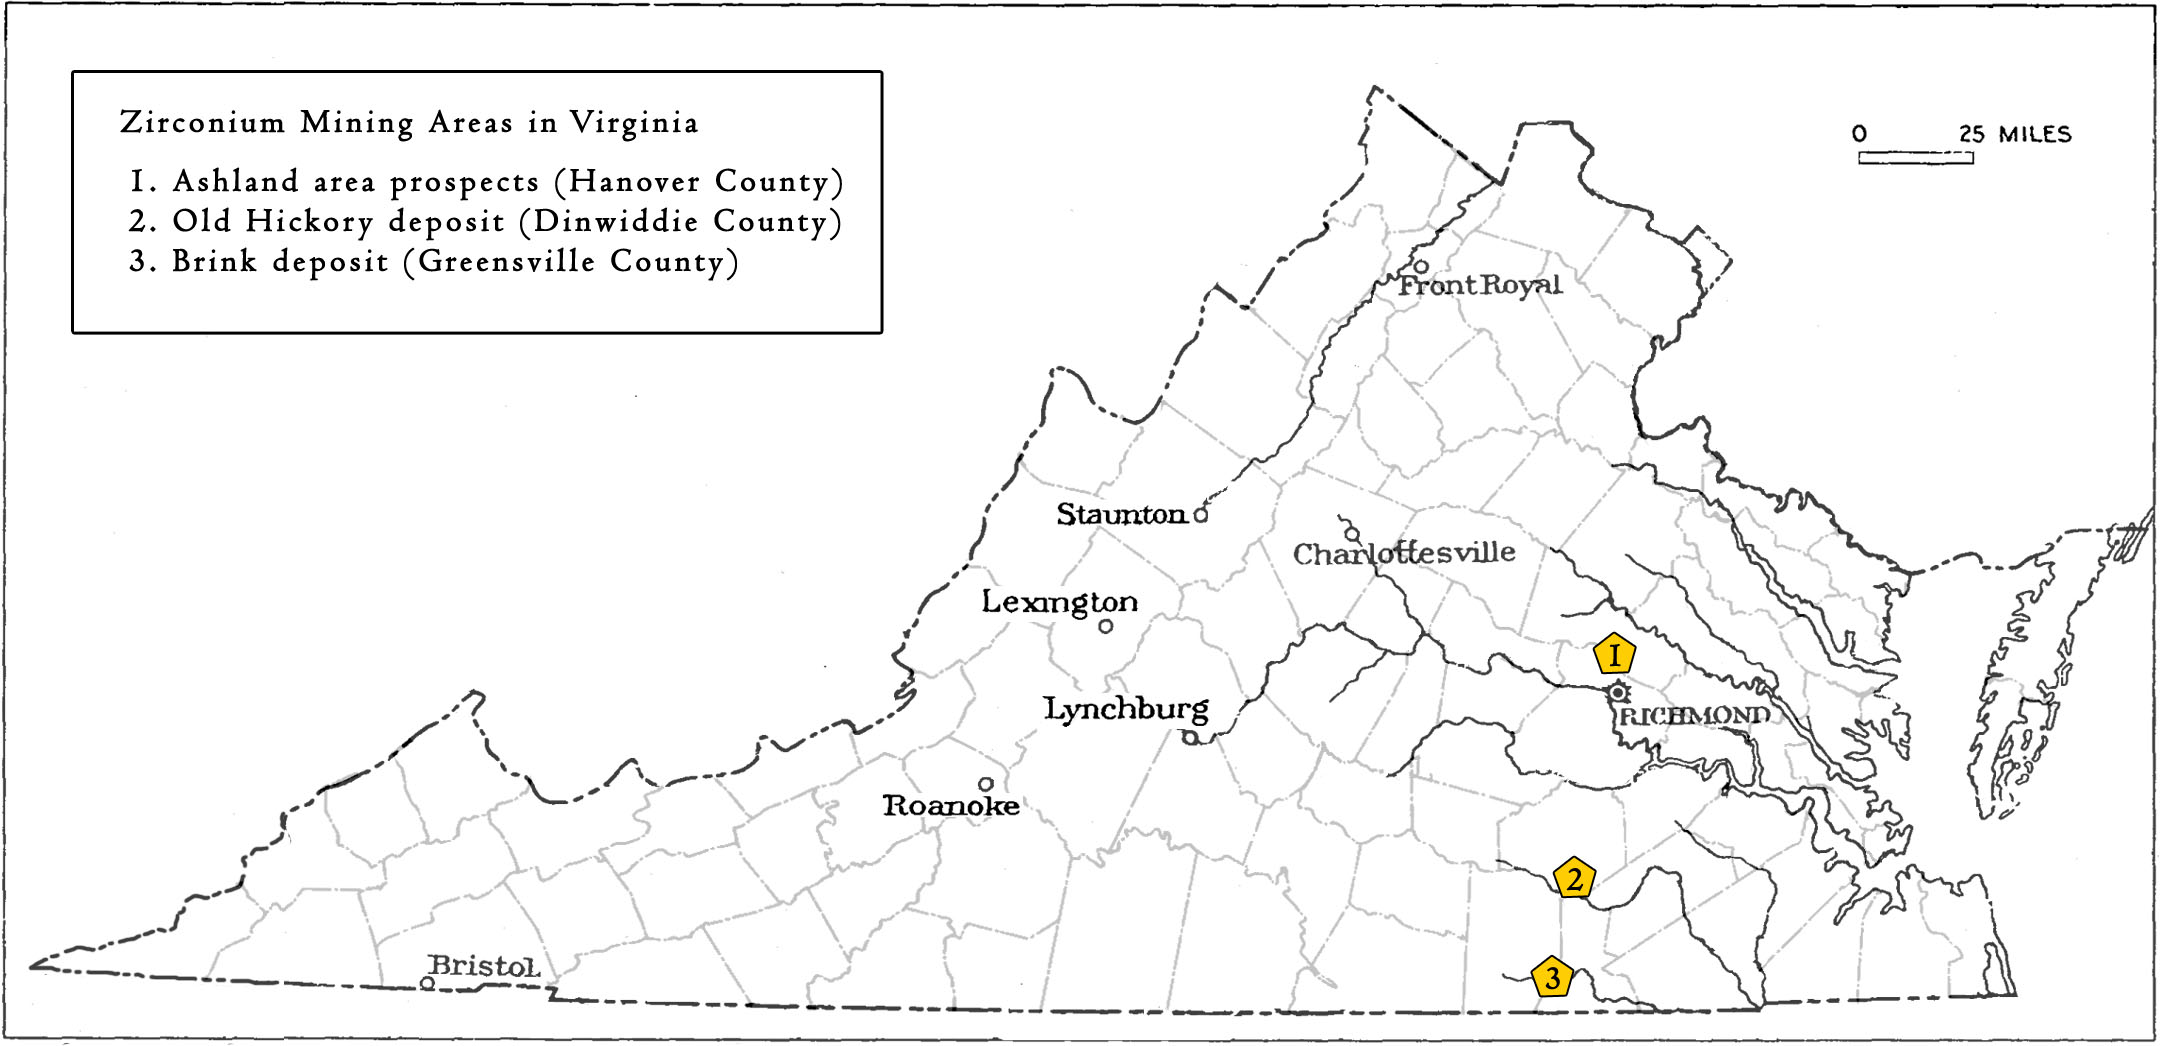 Areas prospected and mined for Zirconium mining in Virginia. 